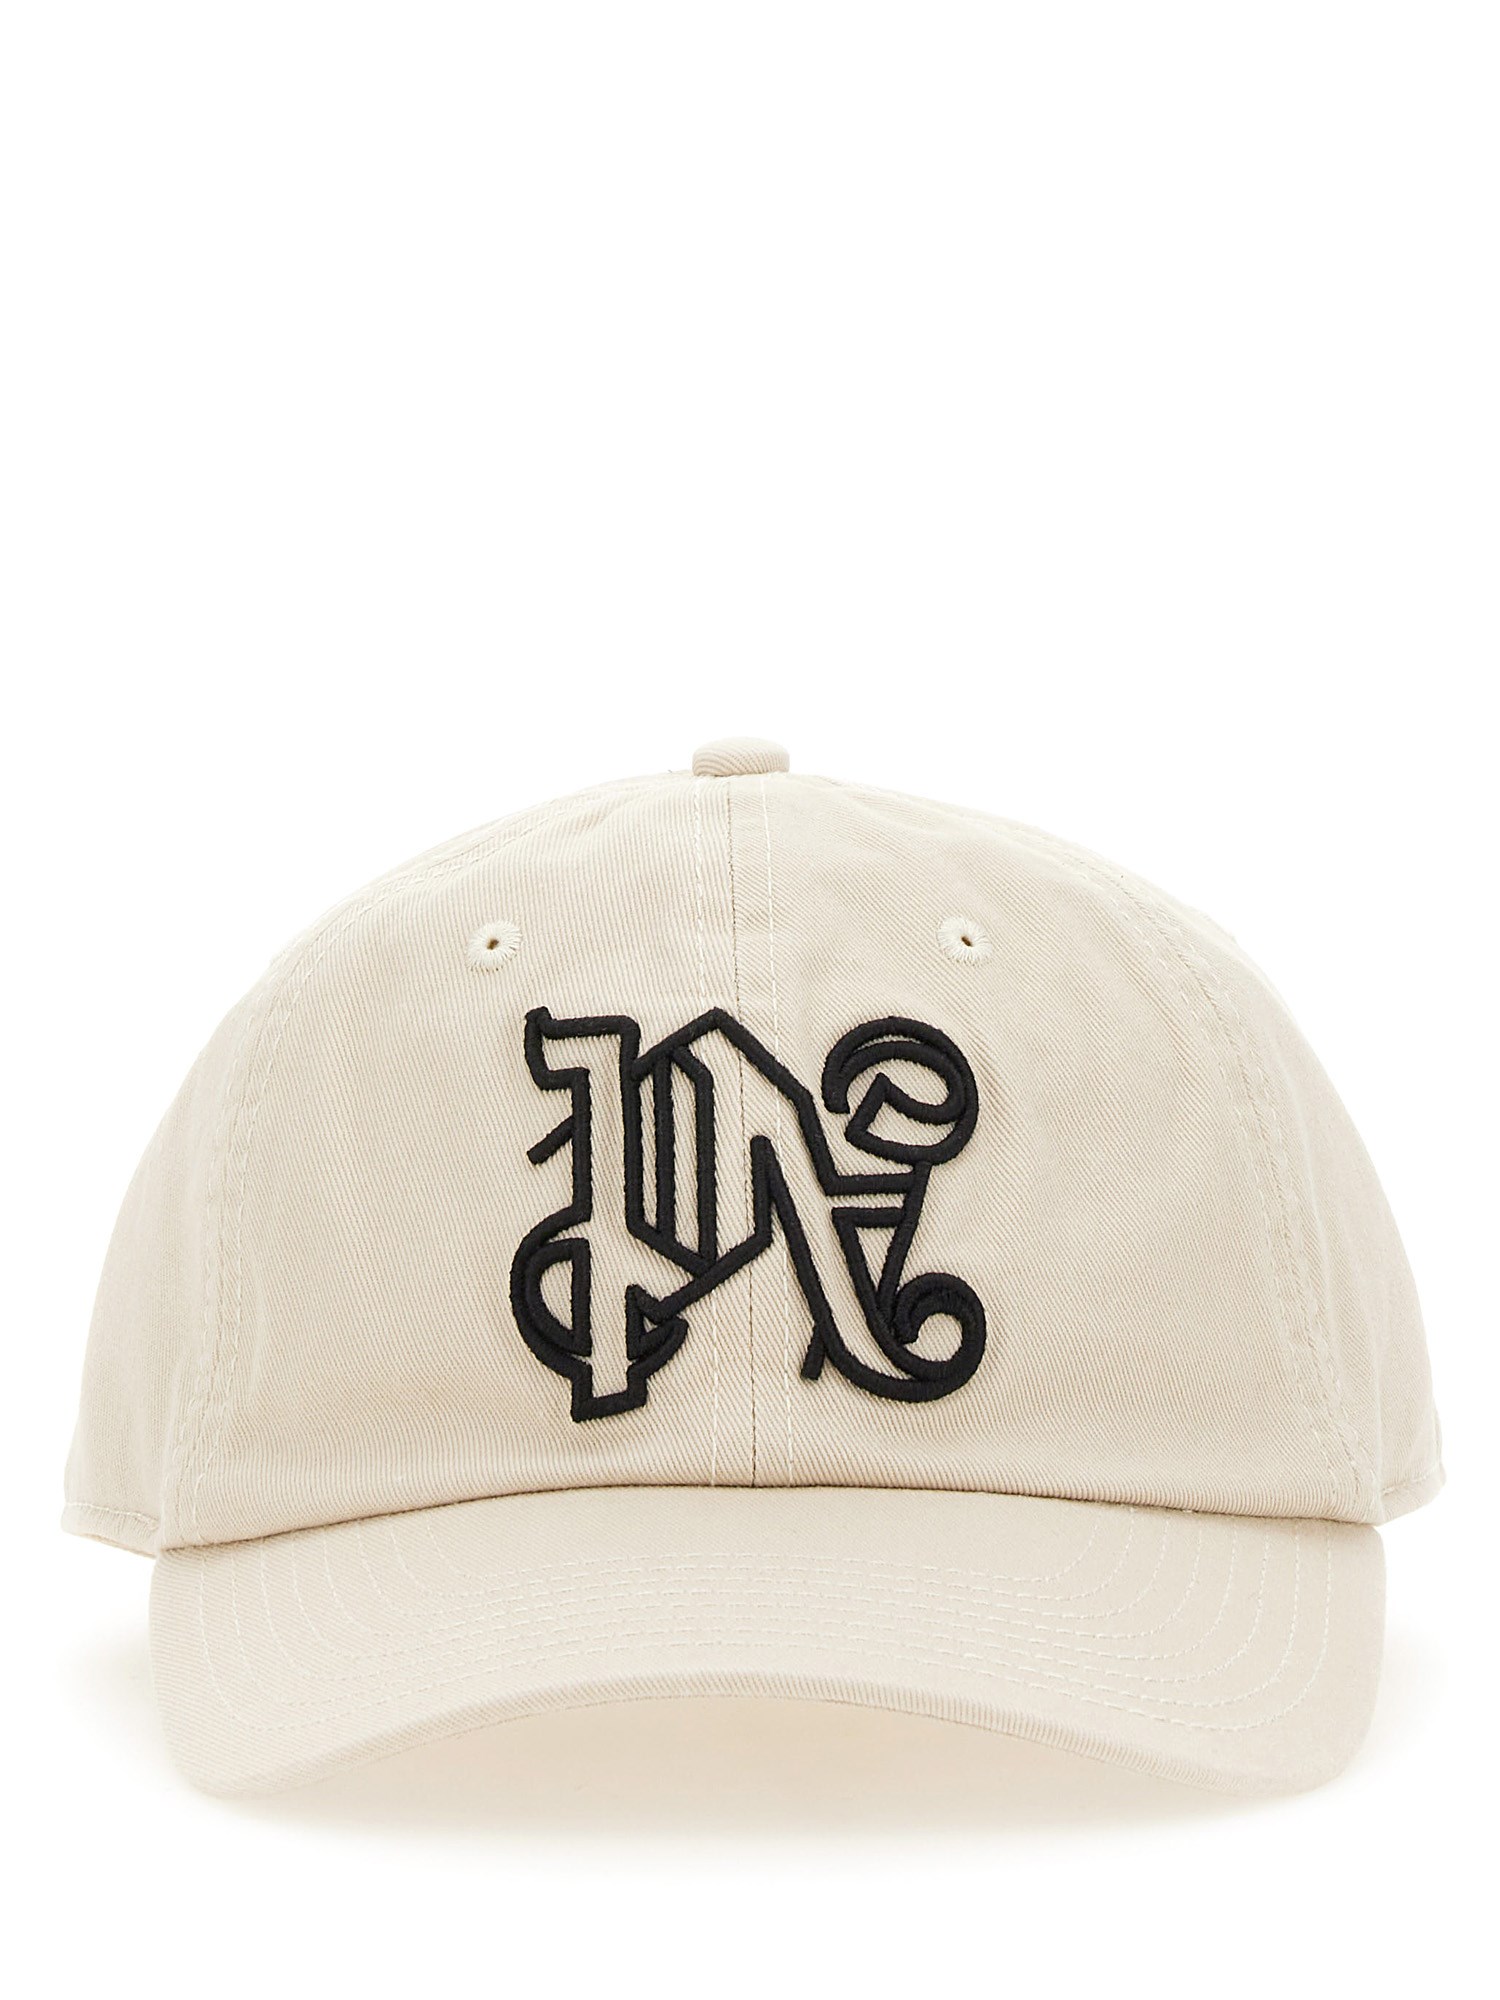 palm angels baseball hat with logo